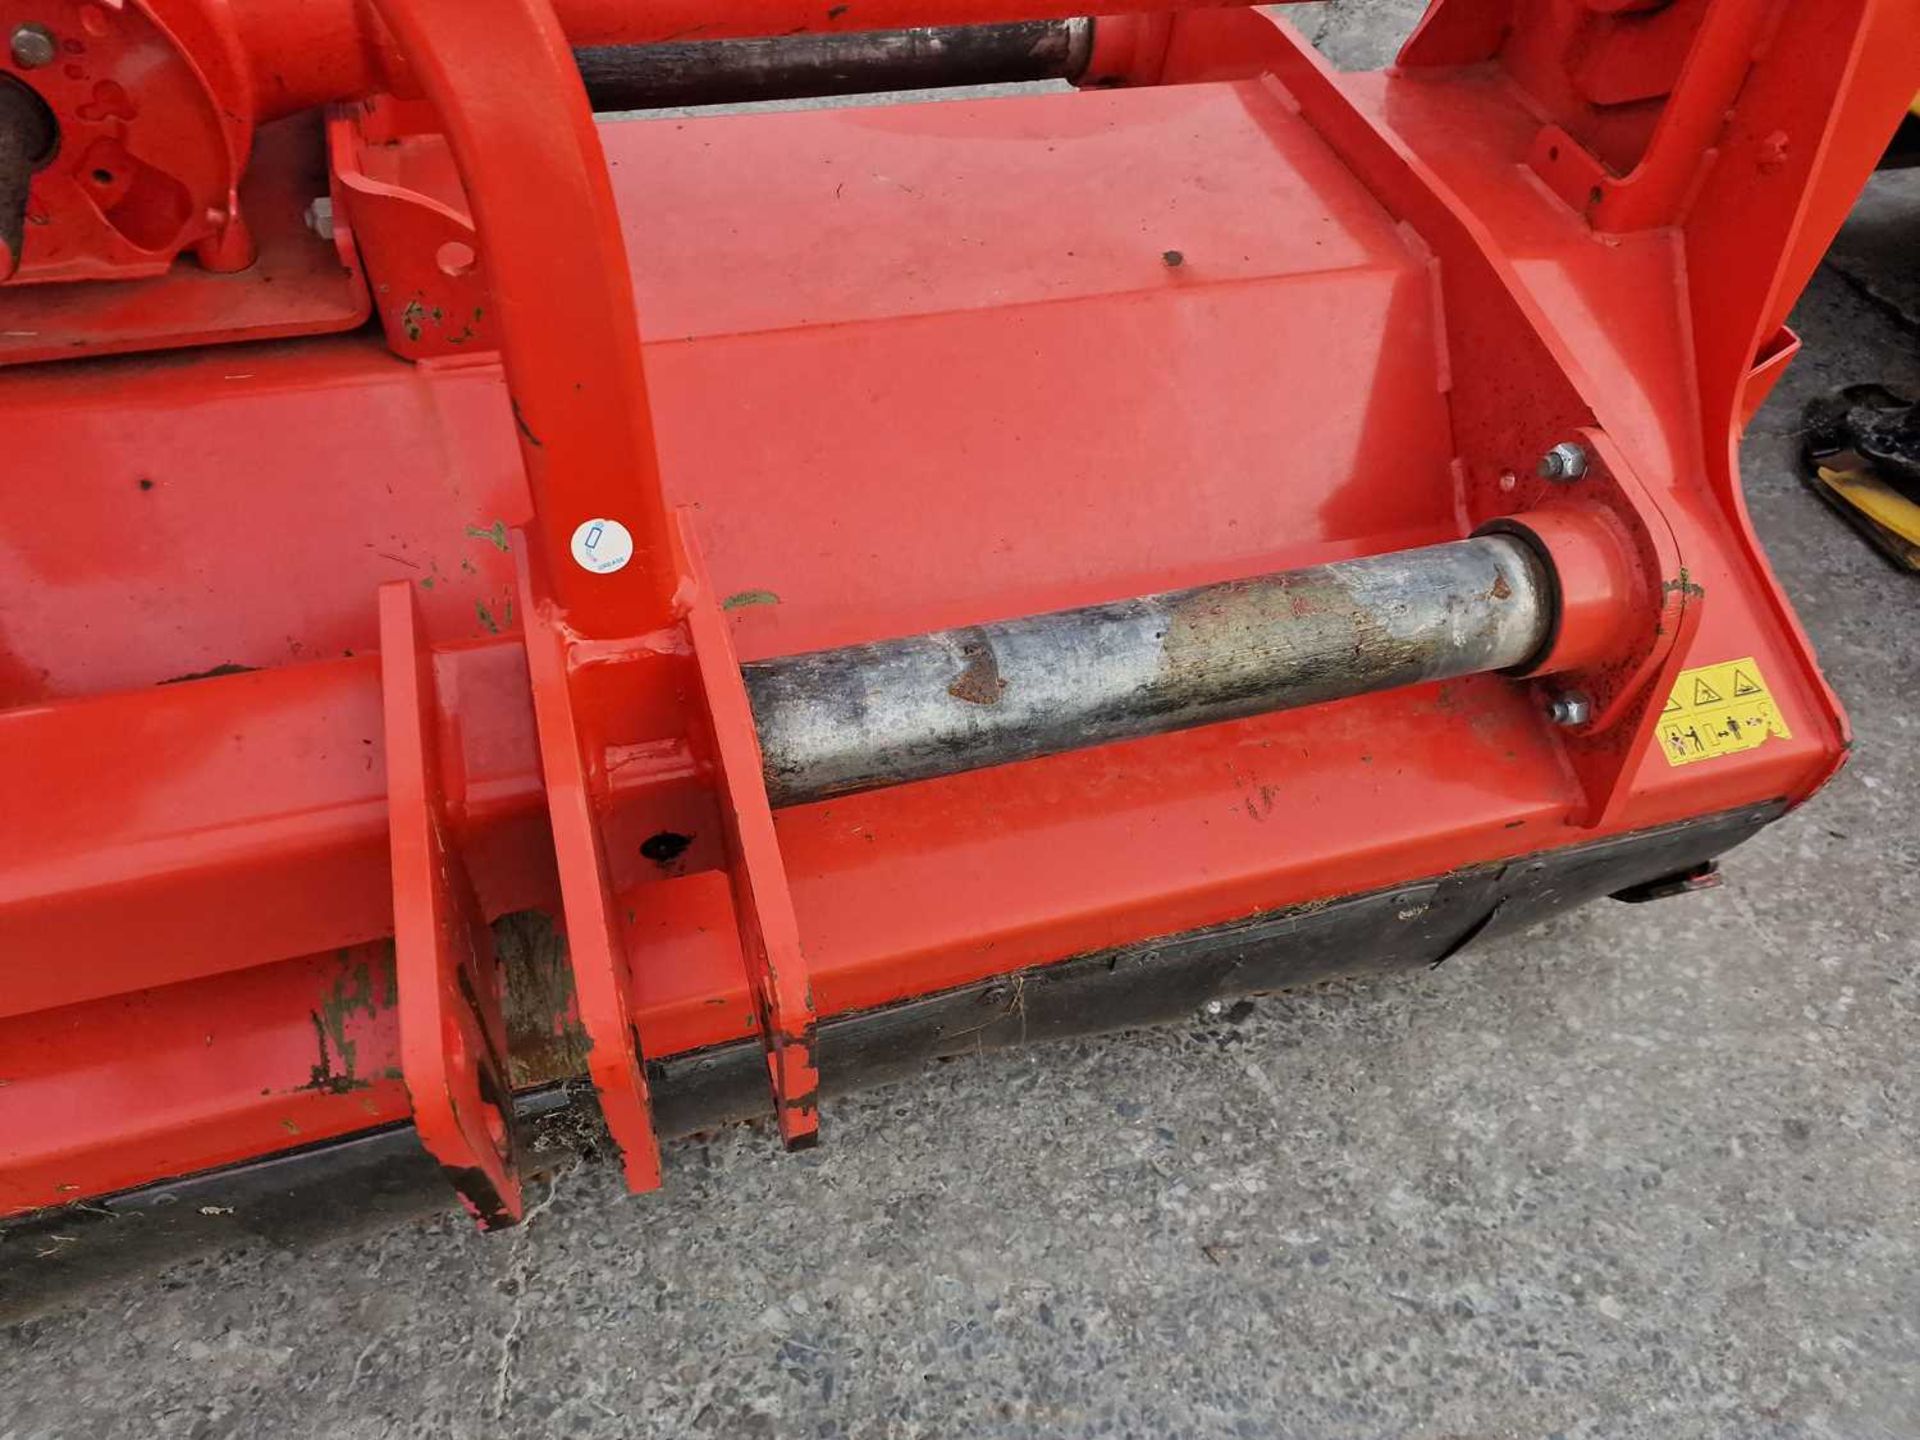 2018 Maschio Bufalo 280 PTO Driven Topper, Side Shift to suit 3 Point Linkage - Image 7 of 11